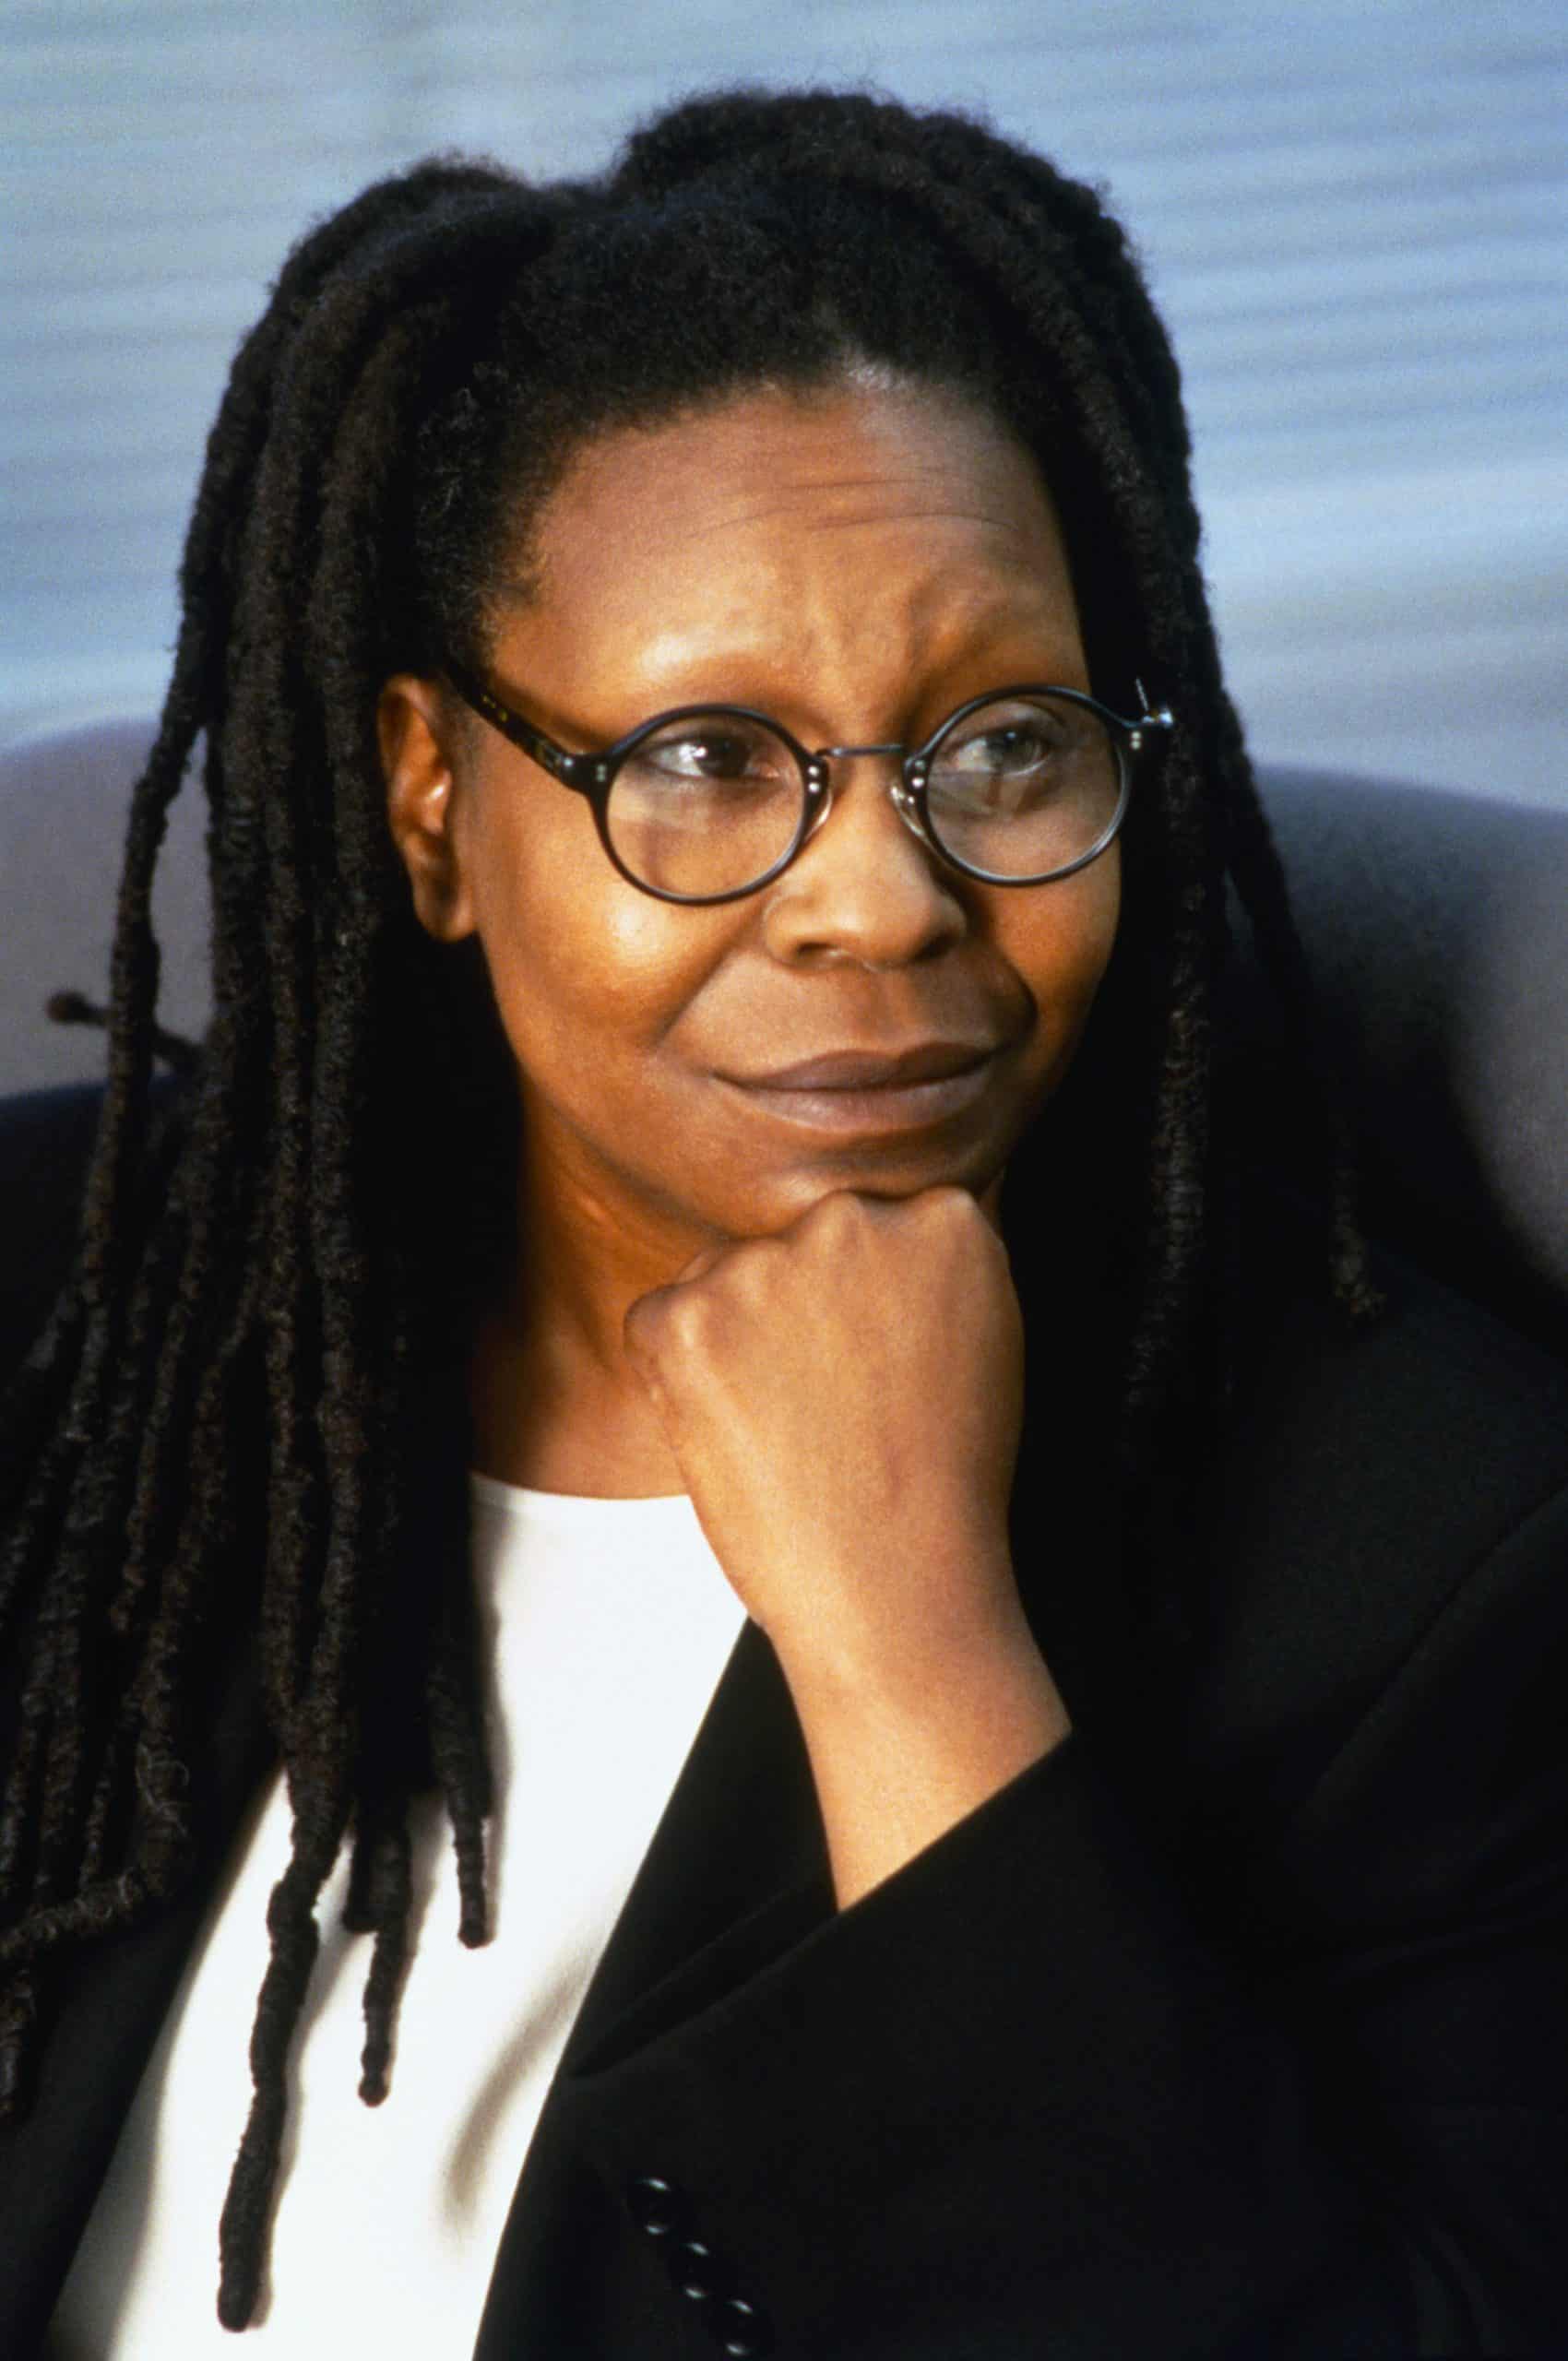 THE DEEP END OF THE OCEAN, Whoopi Goldberg, 1999